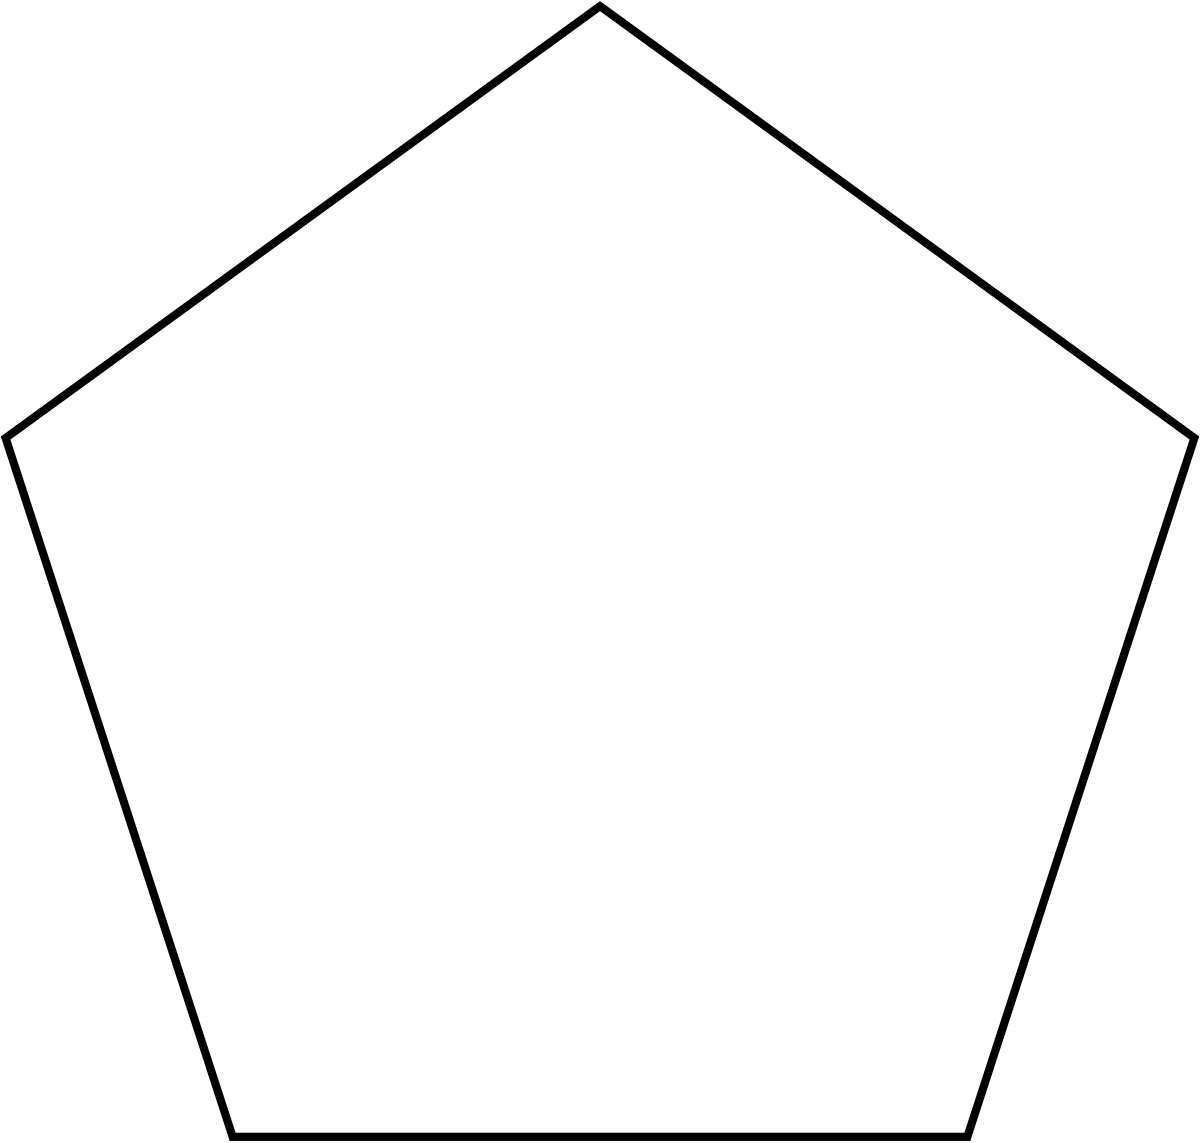 <p>polygon that has all its interior angles less than 180 degrees</p>